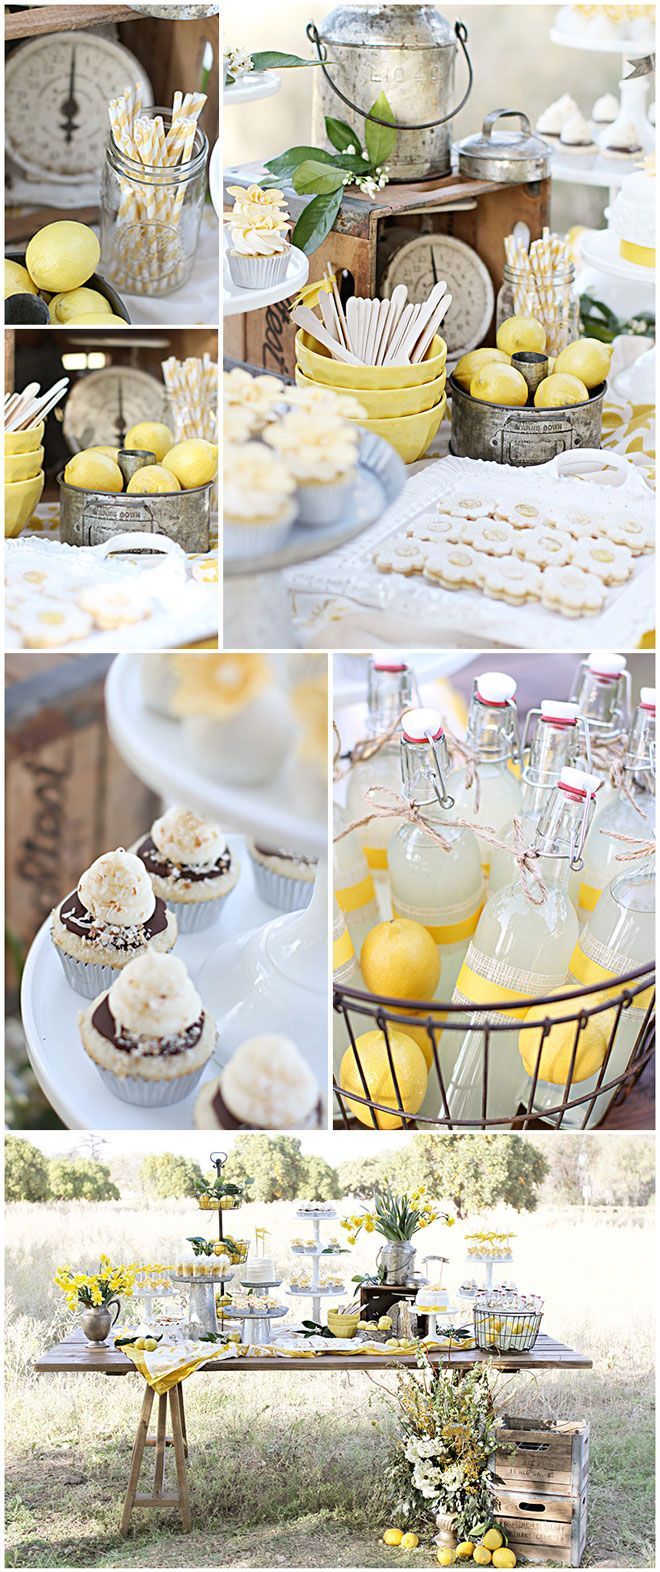 Lemon Garden Party 1 ~  Old farmhouse style furniture, vintage tins, yellow glass and rustic accents.  Tin containers of all